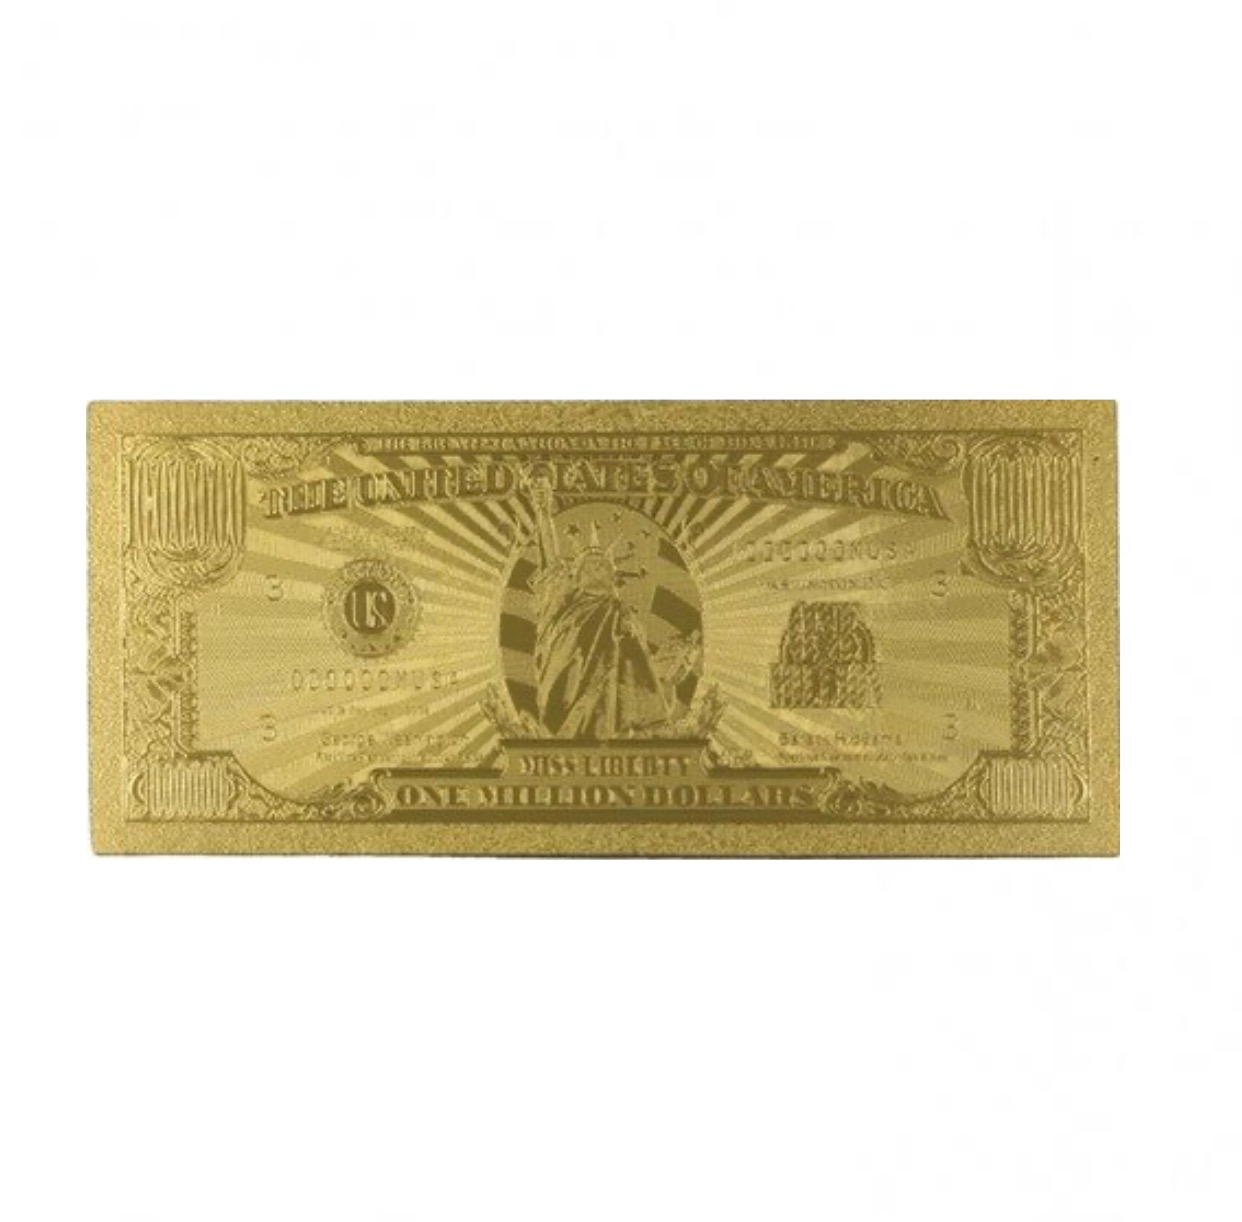 Set of 3 - The Traditional One Million Dollar Bill. Great Novelty Bill!